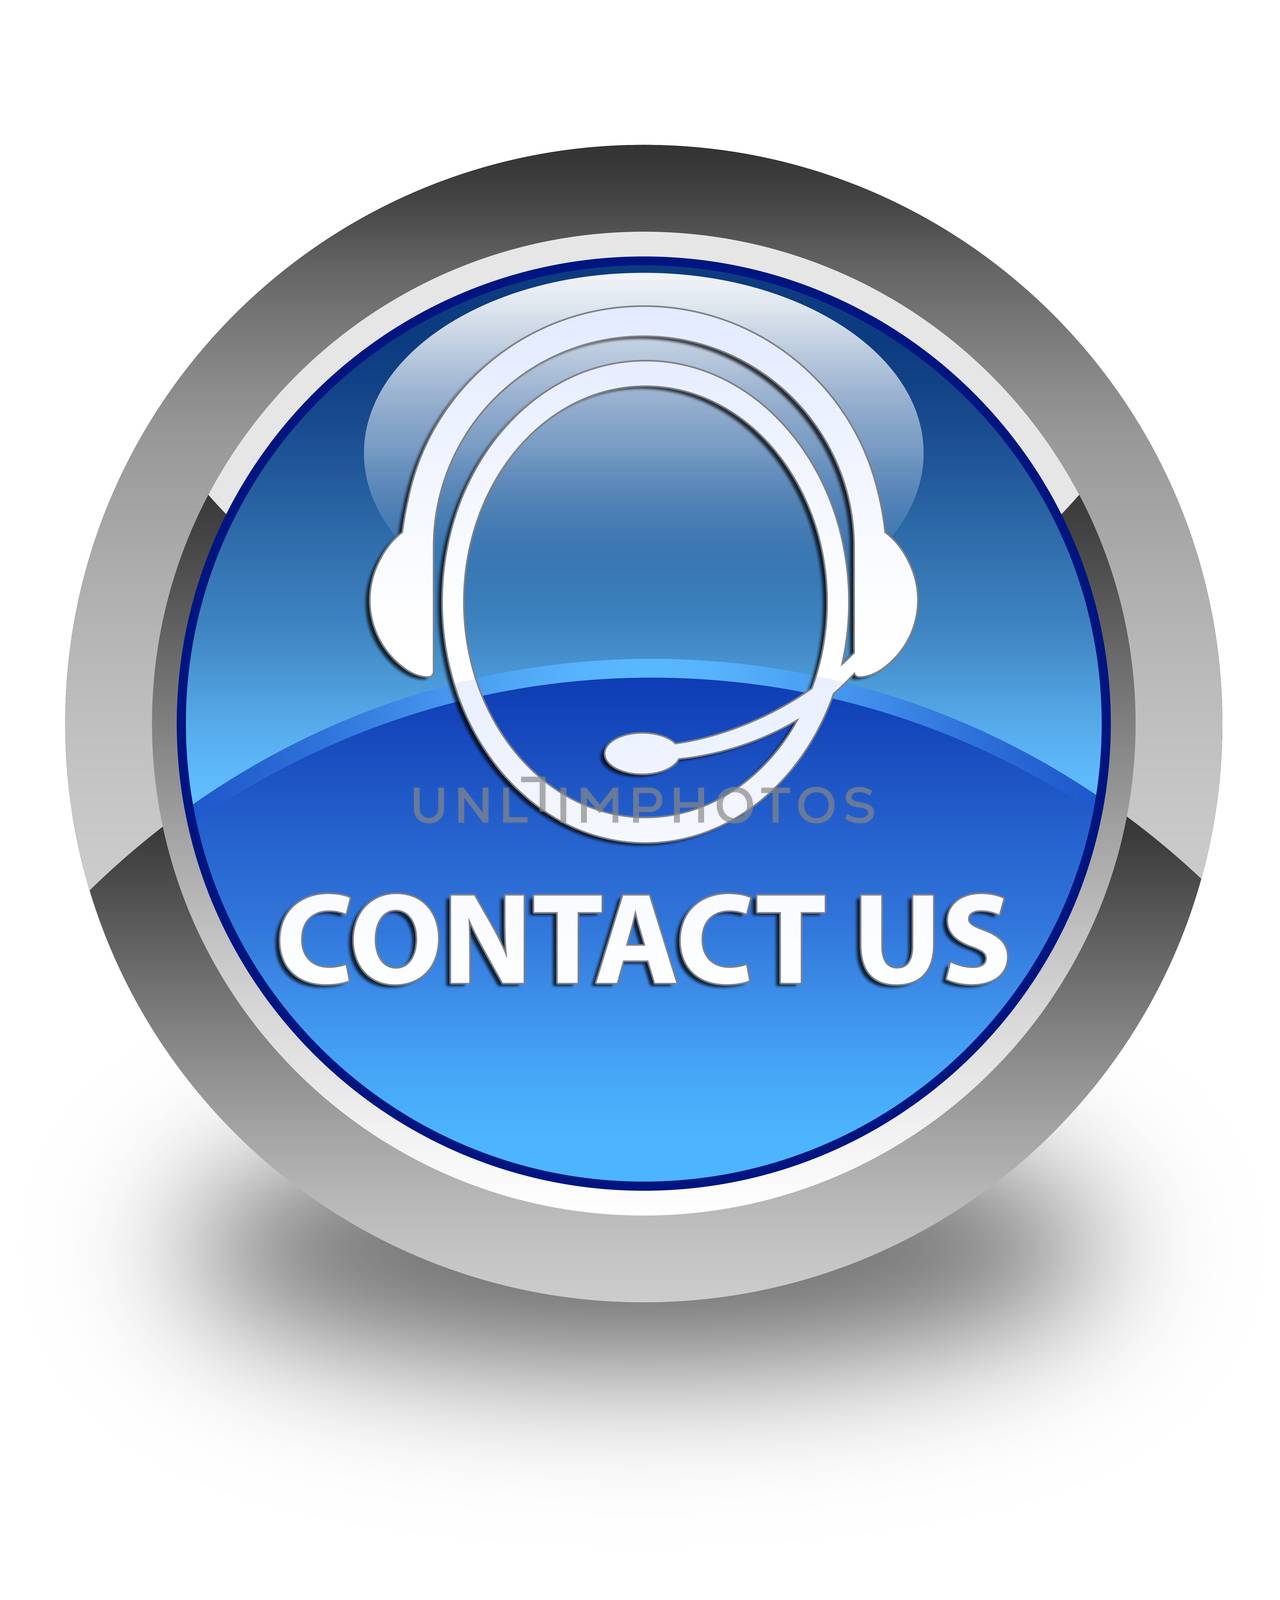 Contact us (customer care icon) glossy blue round button